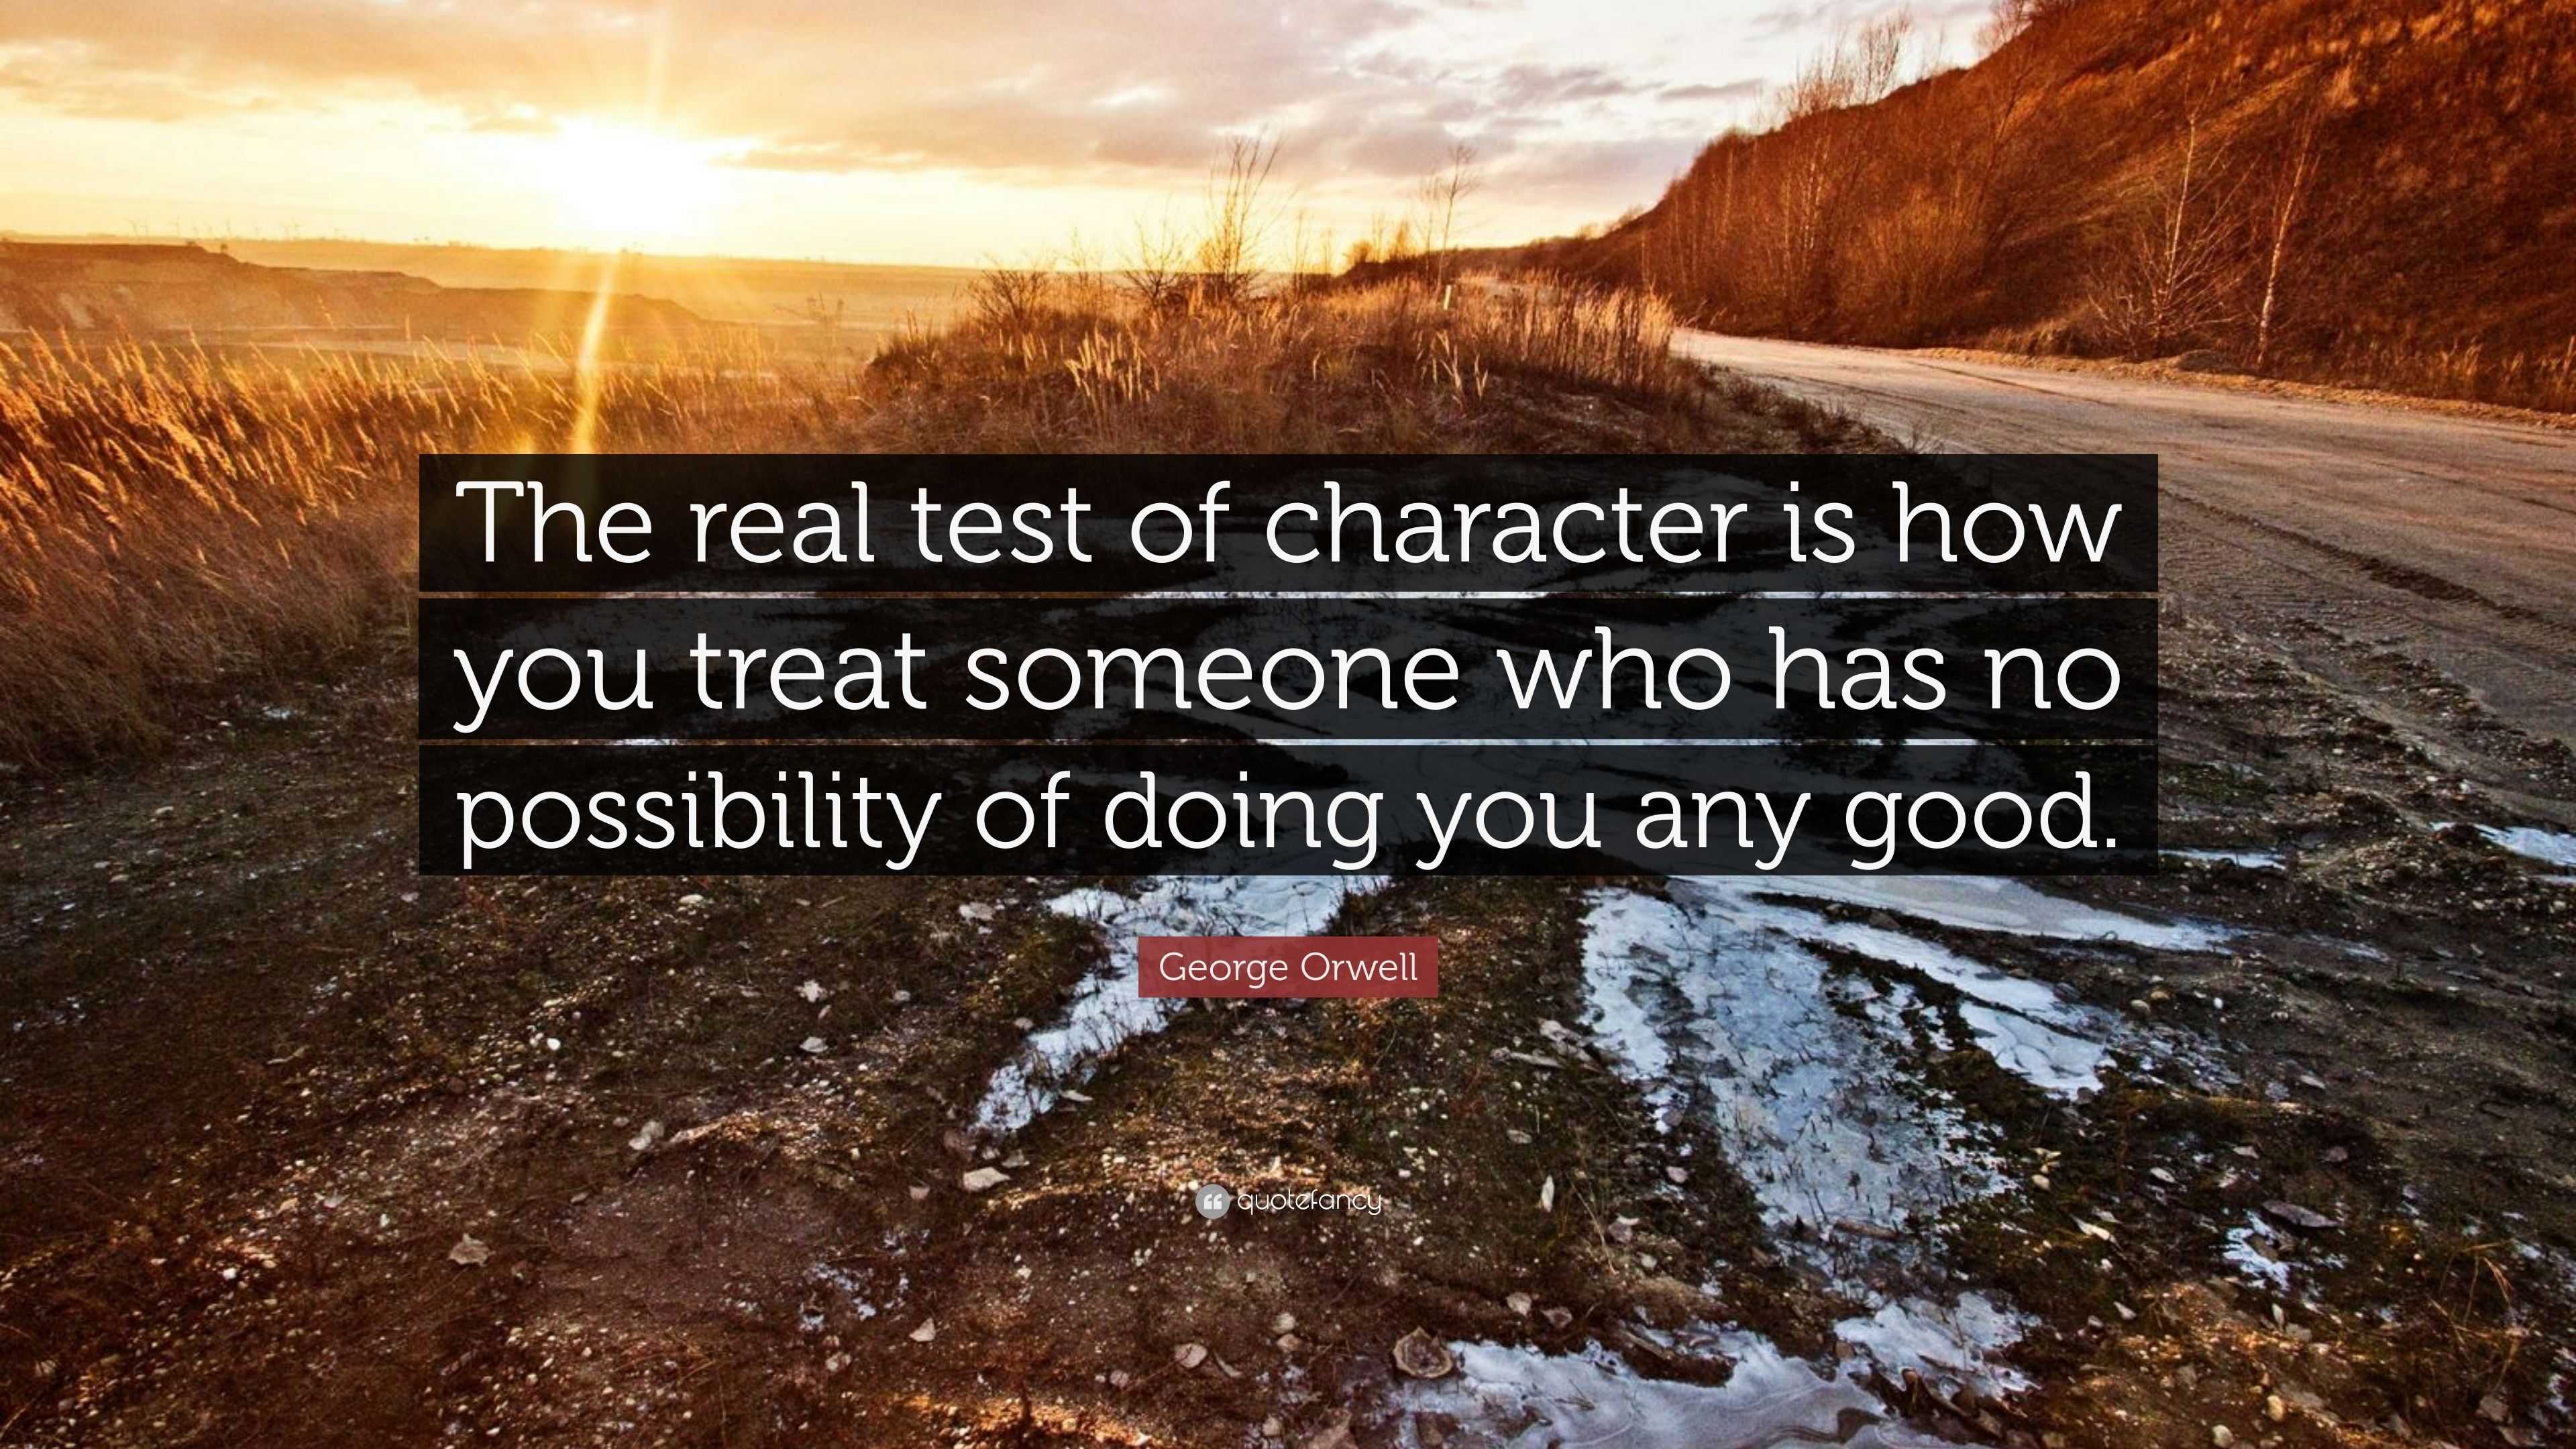 George Orwell Quote “The real test of character is how you treat someone who